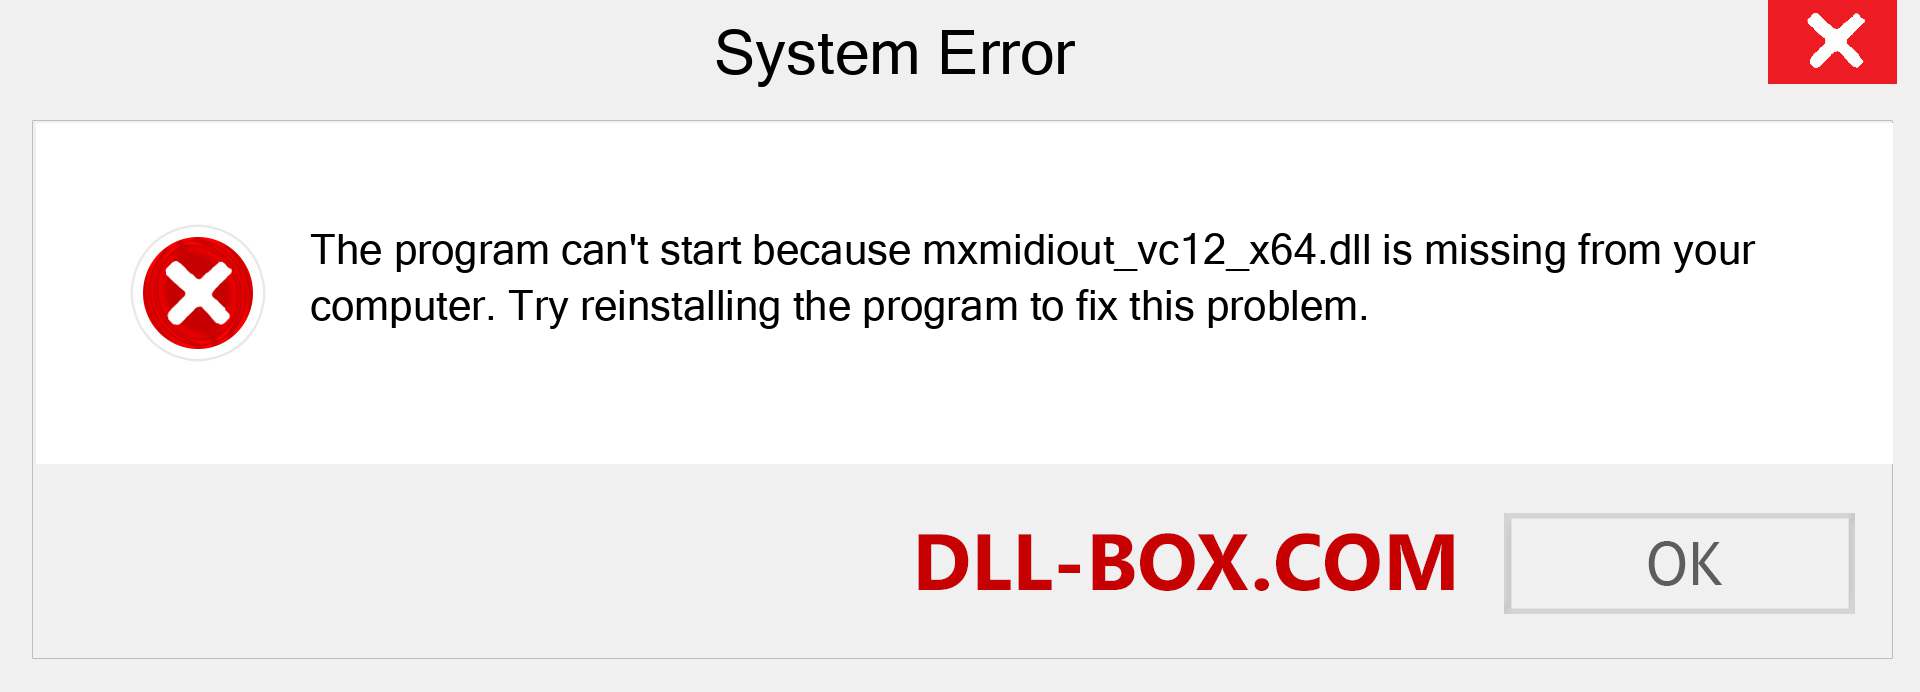  mxmidiout_vc12_x64.dll file is missing?. Download for Windows 7, 8, 10 - Fix  mxmidiout_vc12_x64 dll Missing Error on Windows, photos, images